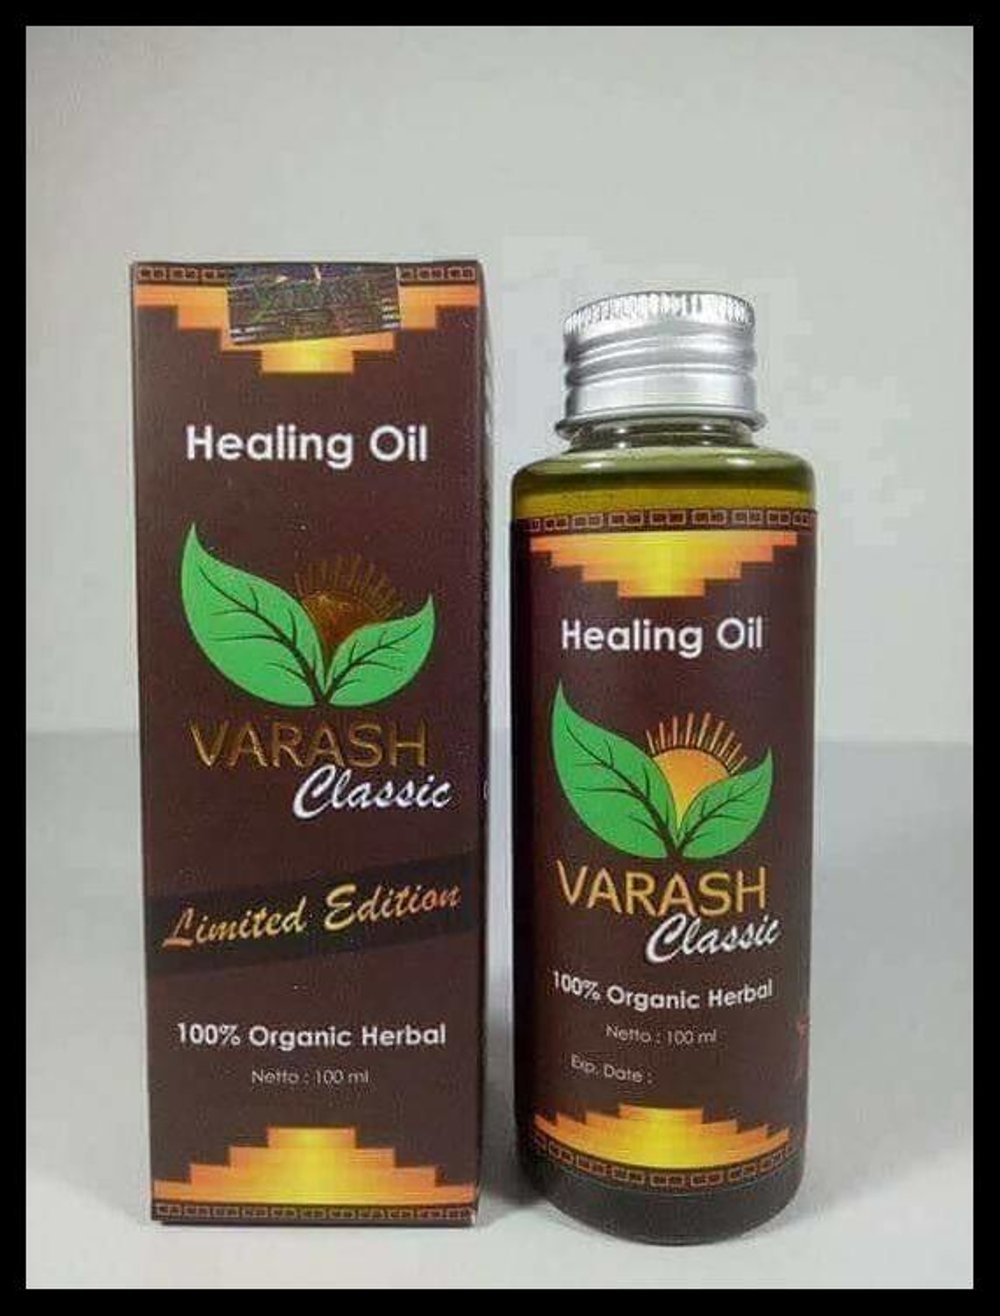 Varash Classic Healing Oil 100ml - Made from 108 types of medicinal plants